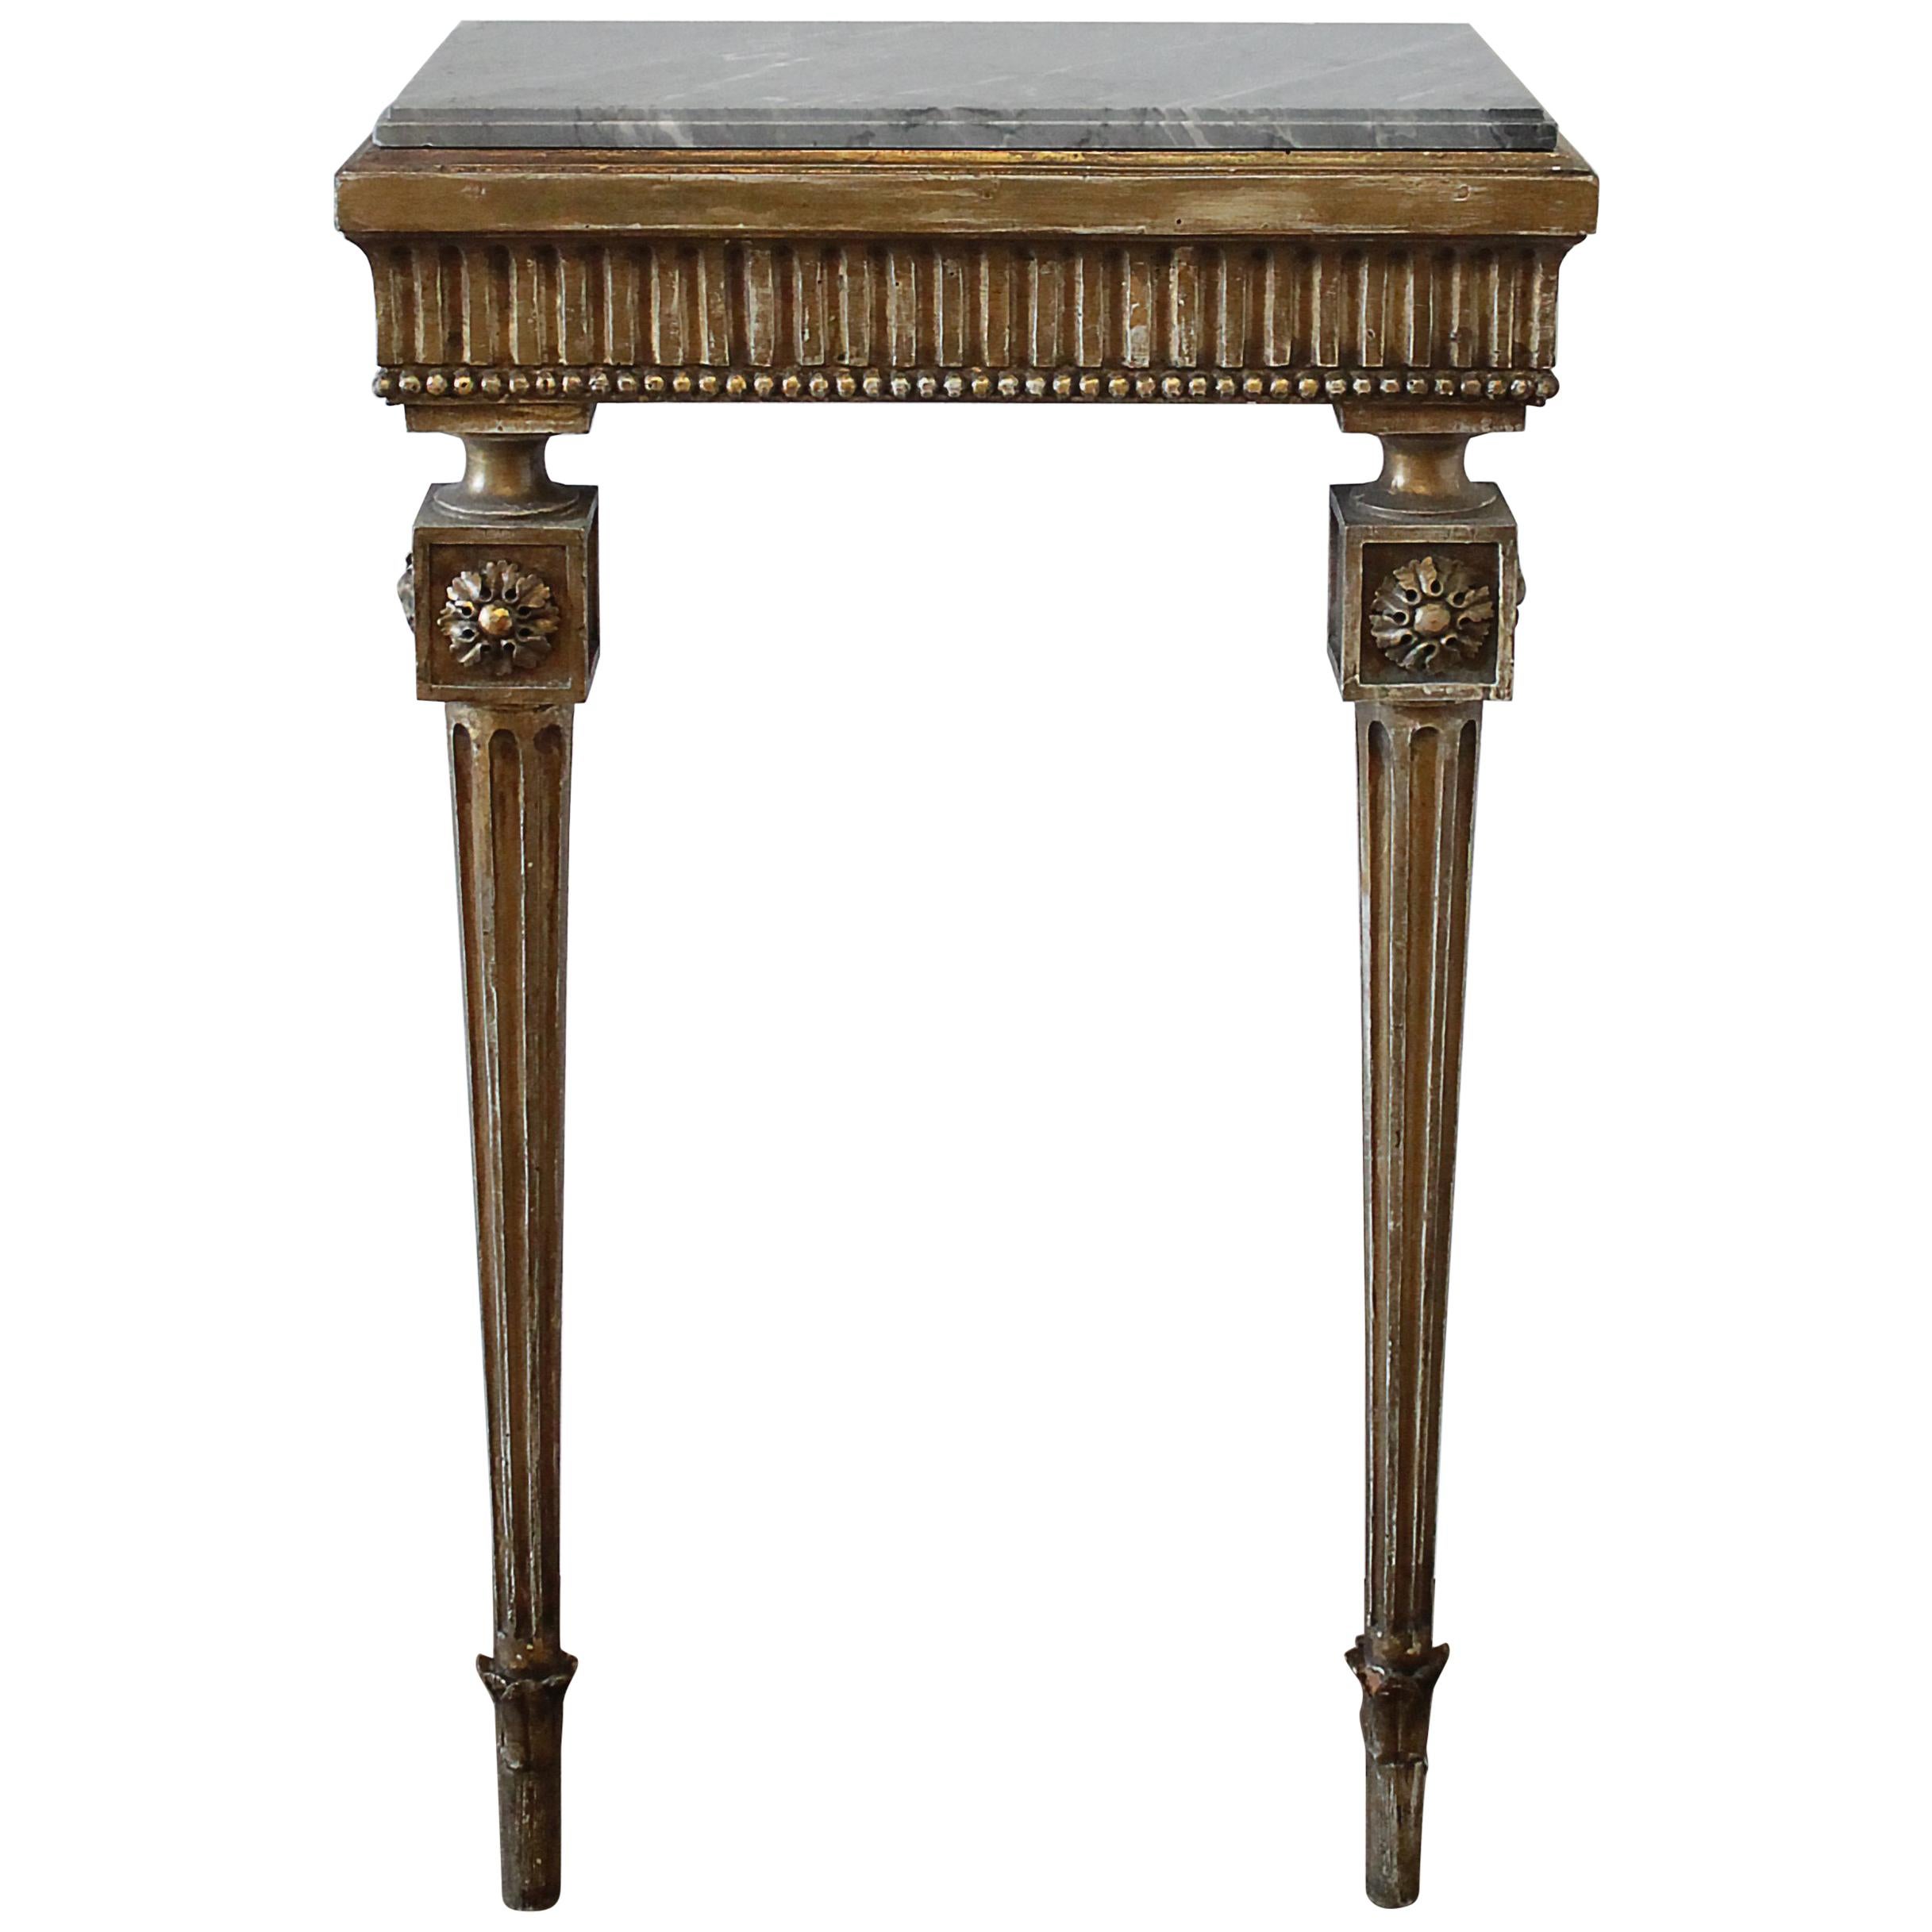 20th Century Louis XVI Style Petite Giltwood Wall Console Table with Stone Top